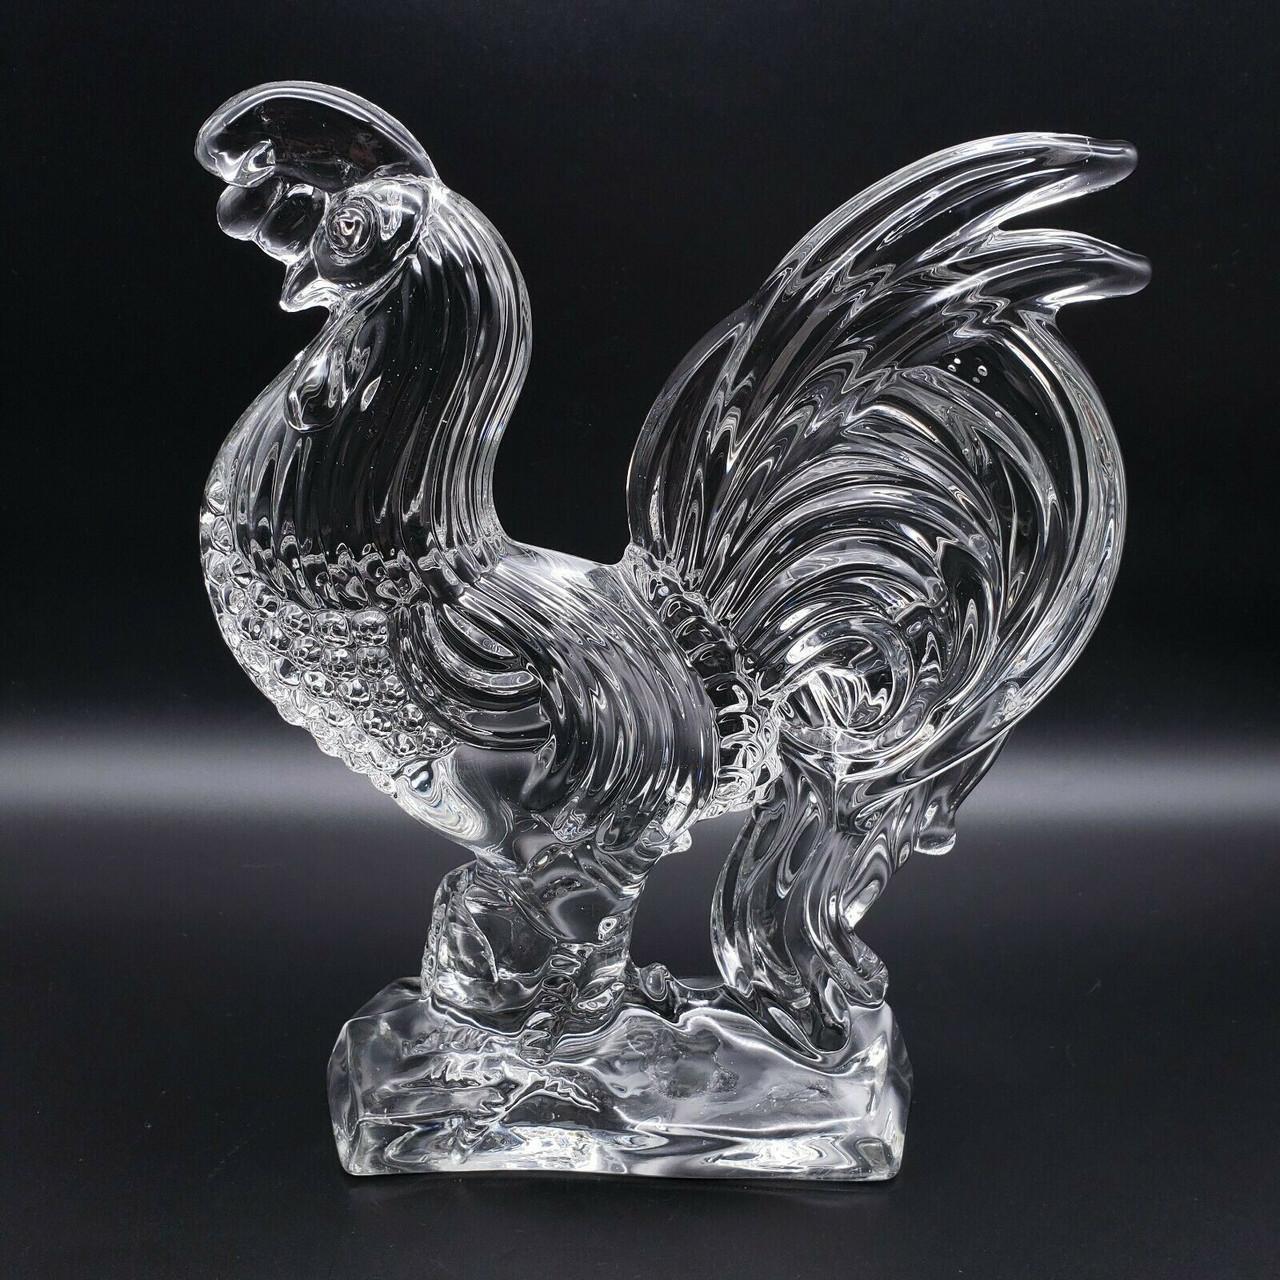 A pristine Fostoria Rooster Figurine

Hallmarks: No / see photos
Crafted In United States
Circa: 1935 - 1986's
Material type: Glass
Dimensions: Height: 10 3/4 in Width: 8 1/2 in
Condition: Excellent!